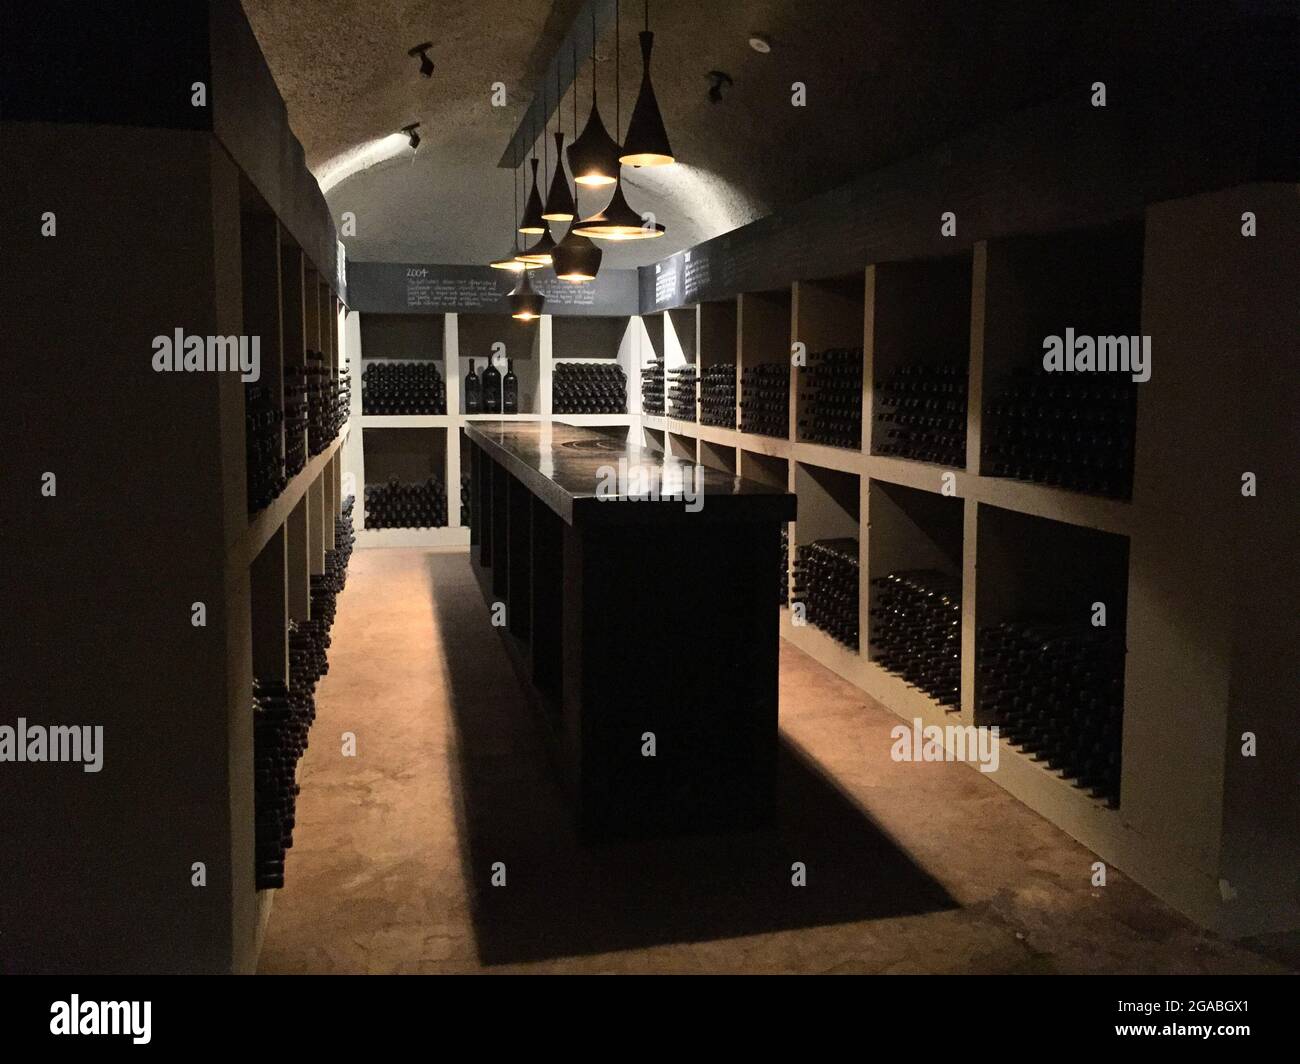 WINDSOR, UNITED STATES - Jul 05, 2018: The dark interior of a winery inside a wine cave at a winery in Windsor, California Stock Photo